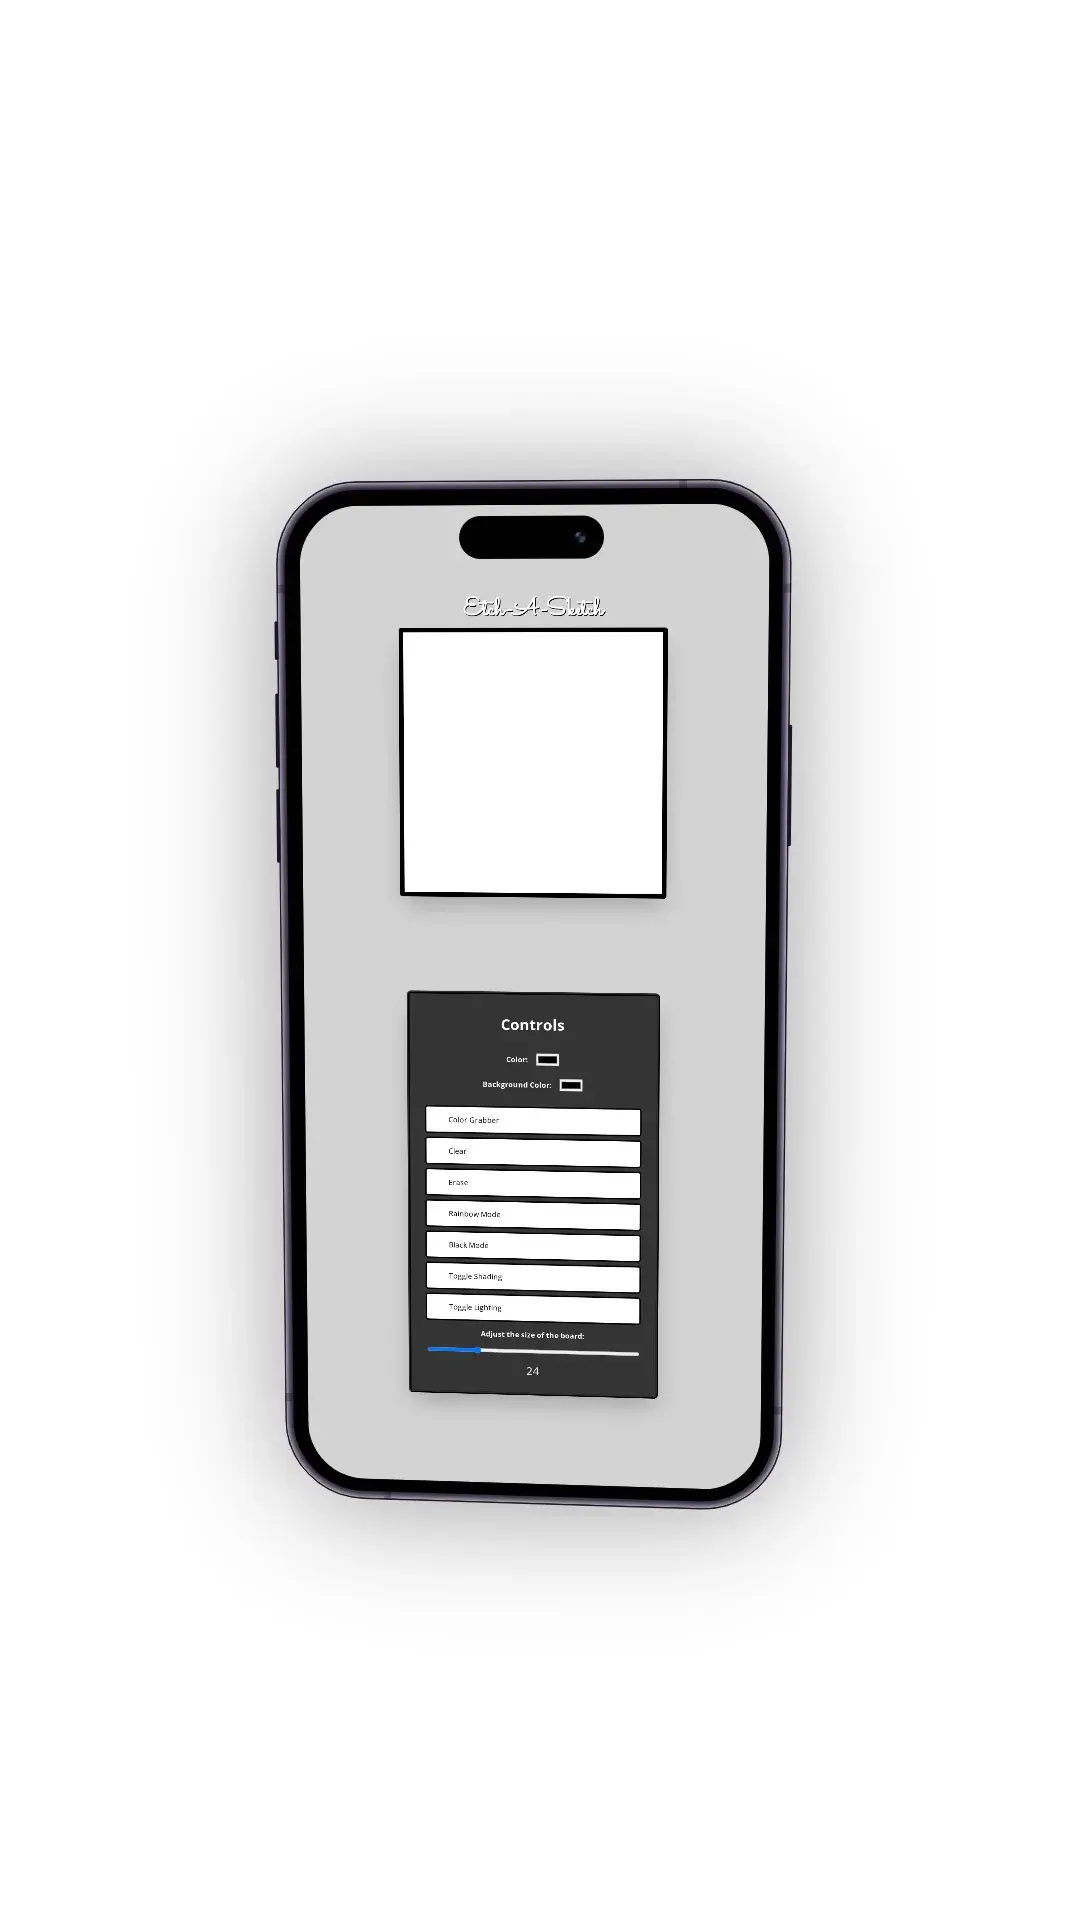 Mockup of a smartphone displaying the 'Etch-A-Sketch' application. The top section has a blank drawing area, while the bottom section features a control panel with buttons for color, background color, and various modes. A slider to adjust the board's size is also present.